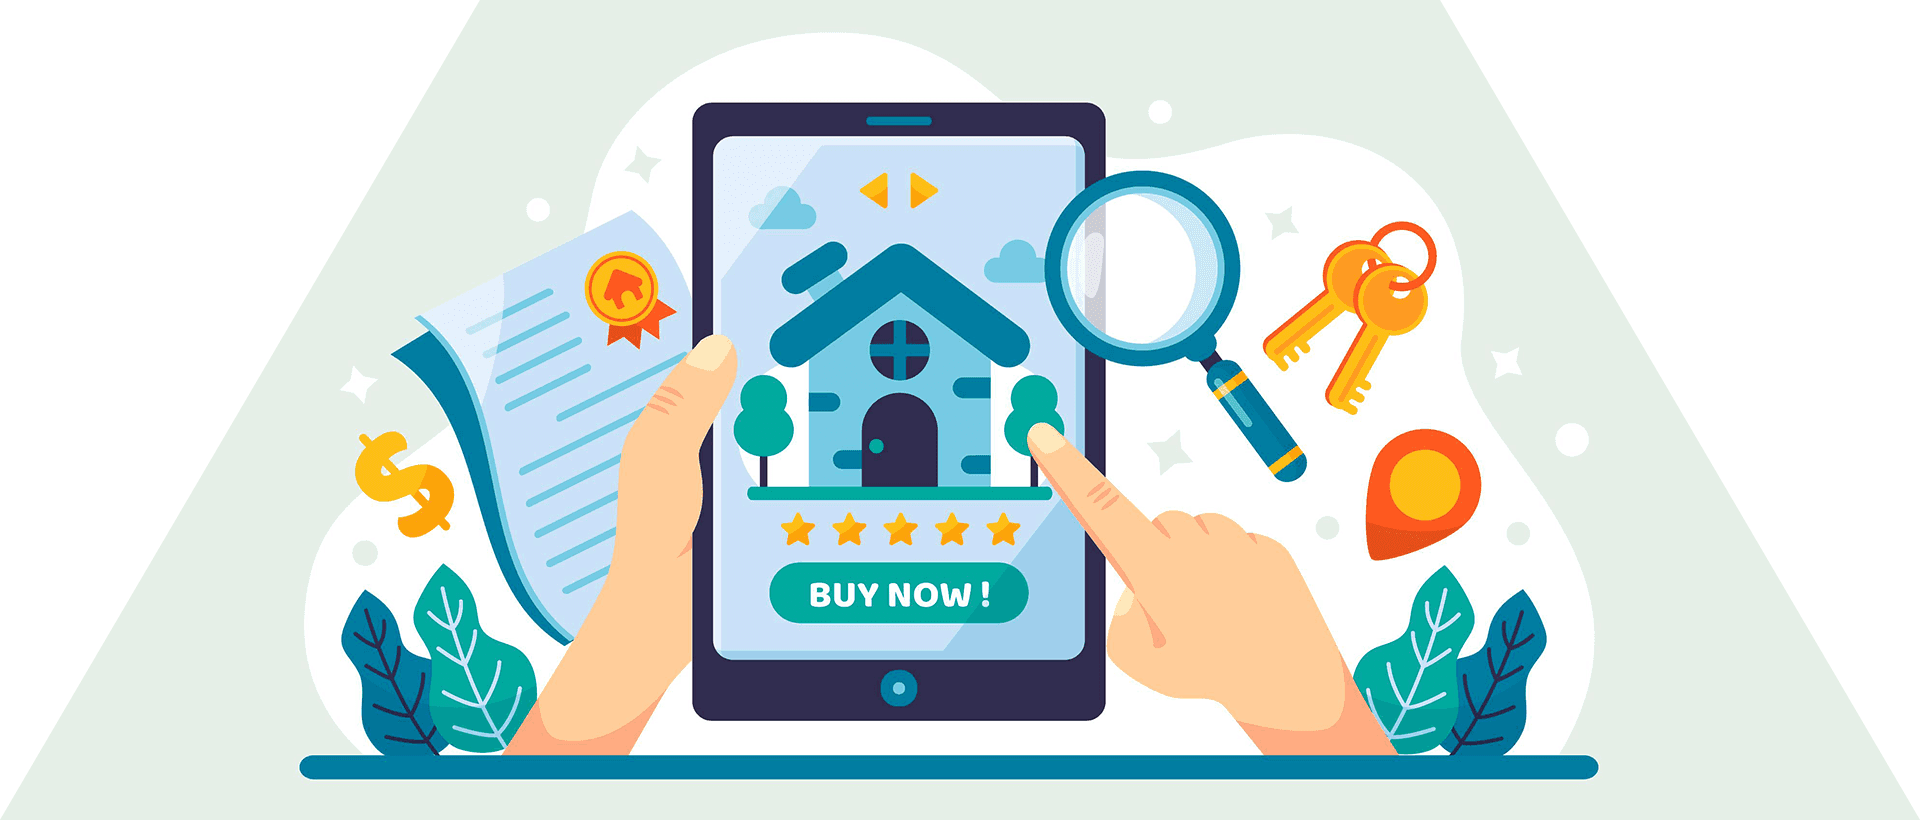 Product Innovative Solutions in Real Estate: How Housing.com, Redfin, and Zillow are Disrupting the Game with Embedded Finance - Be1B image